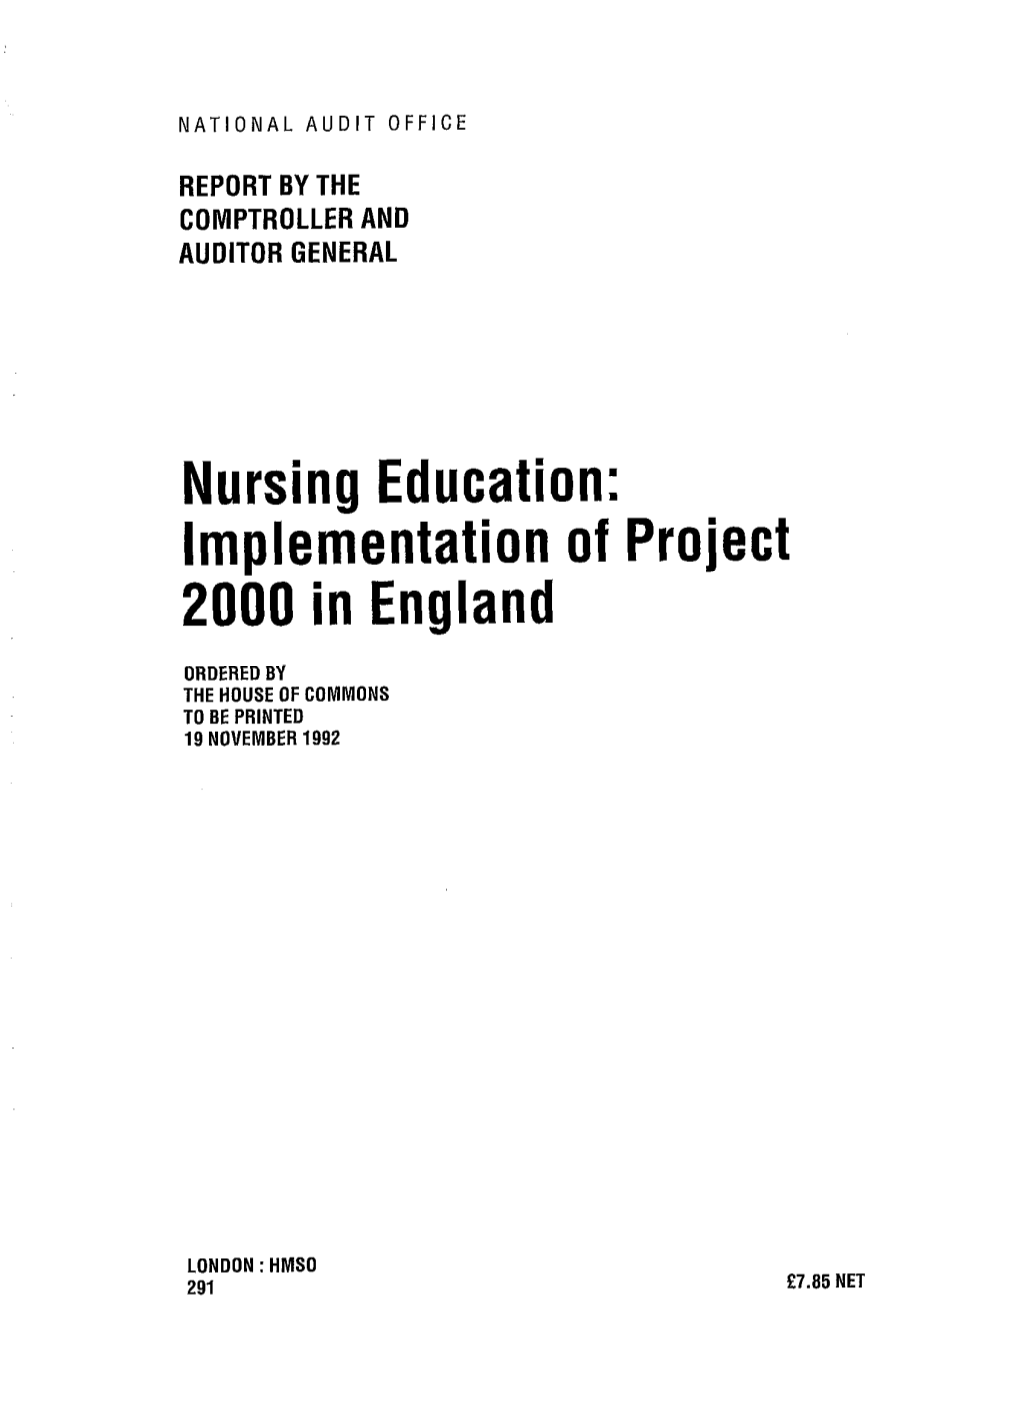 Nursing Education: Implementation of Project 2000 in England